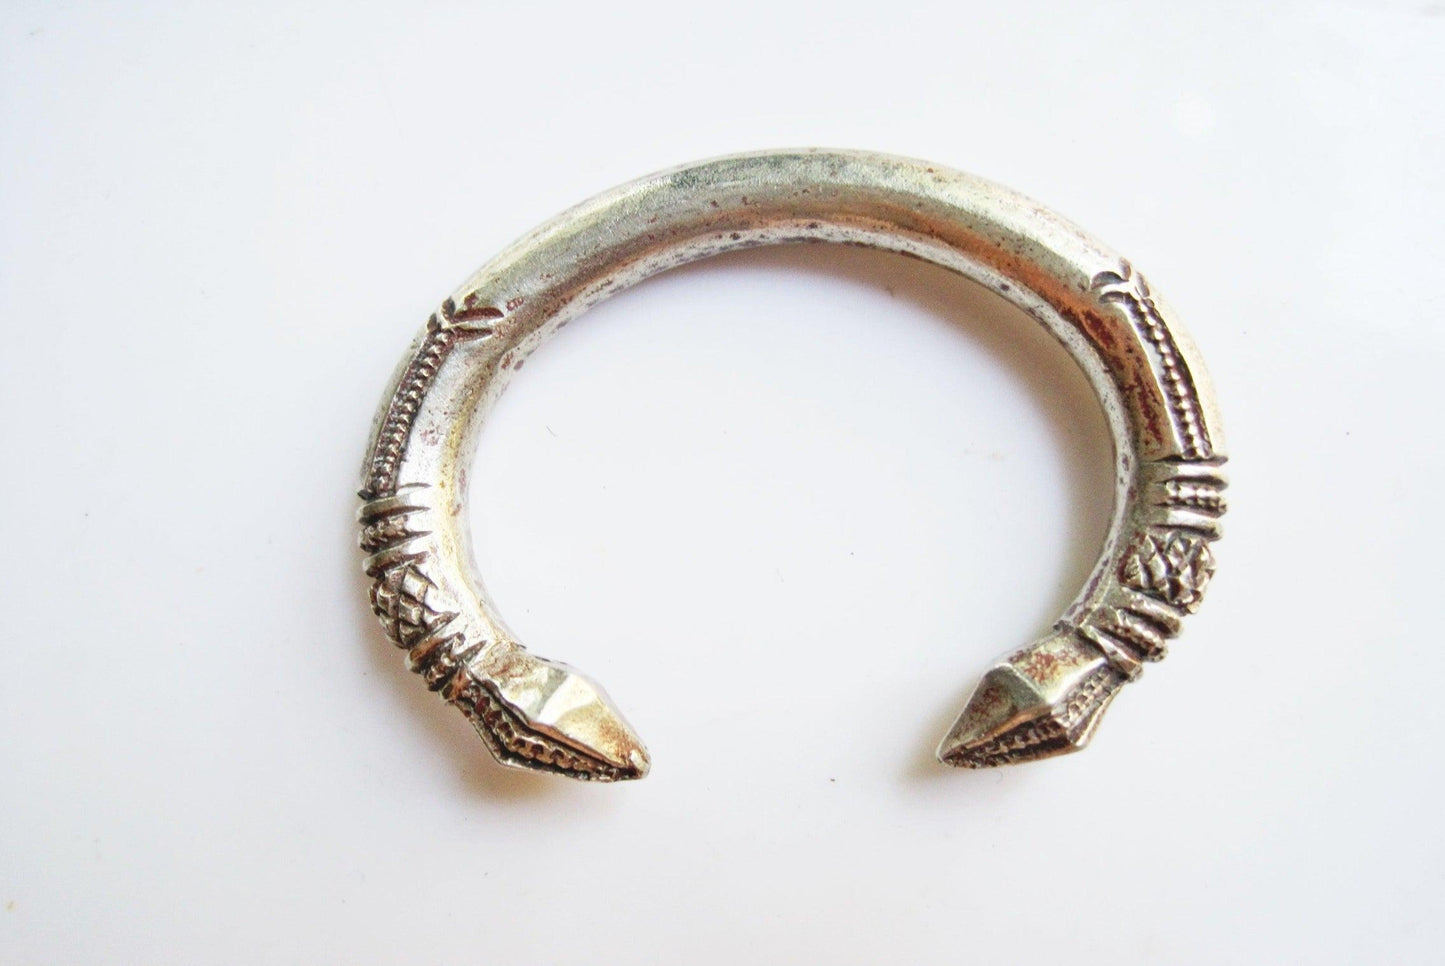 Vintage Solid Bedouin Cuff with Stylized Snake Head Finials - Anteeka